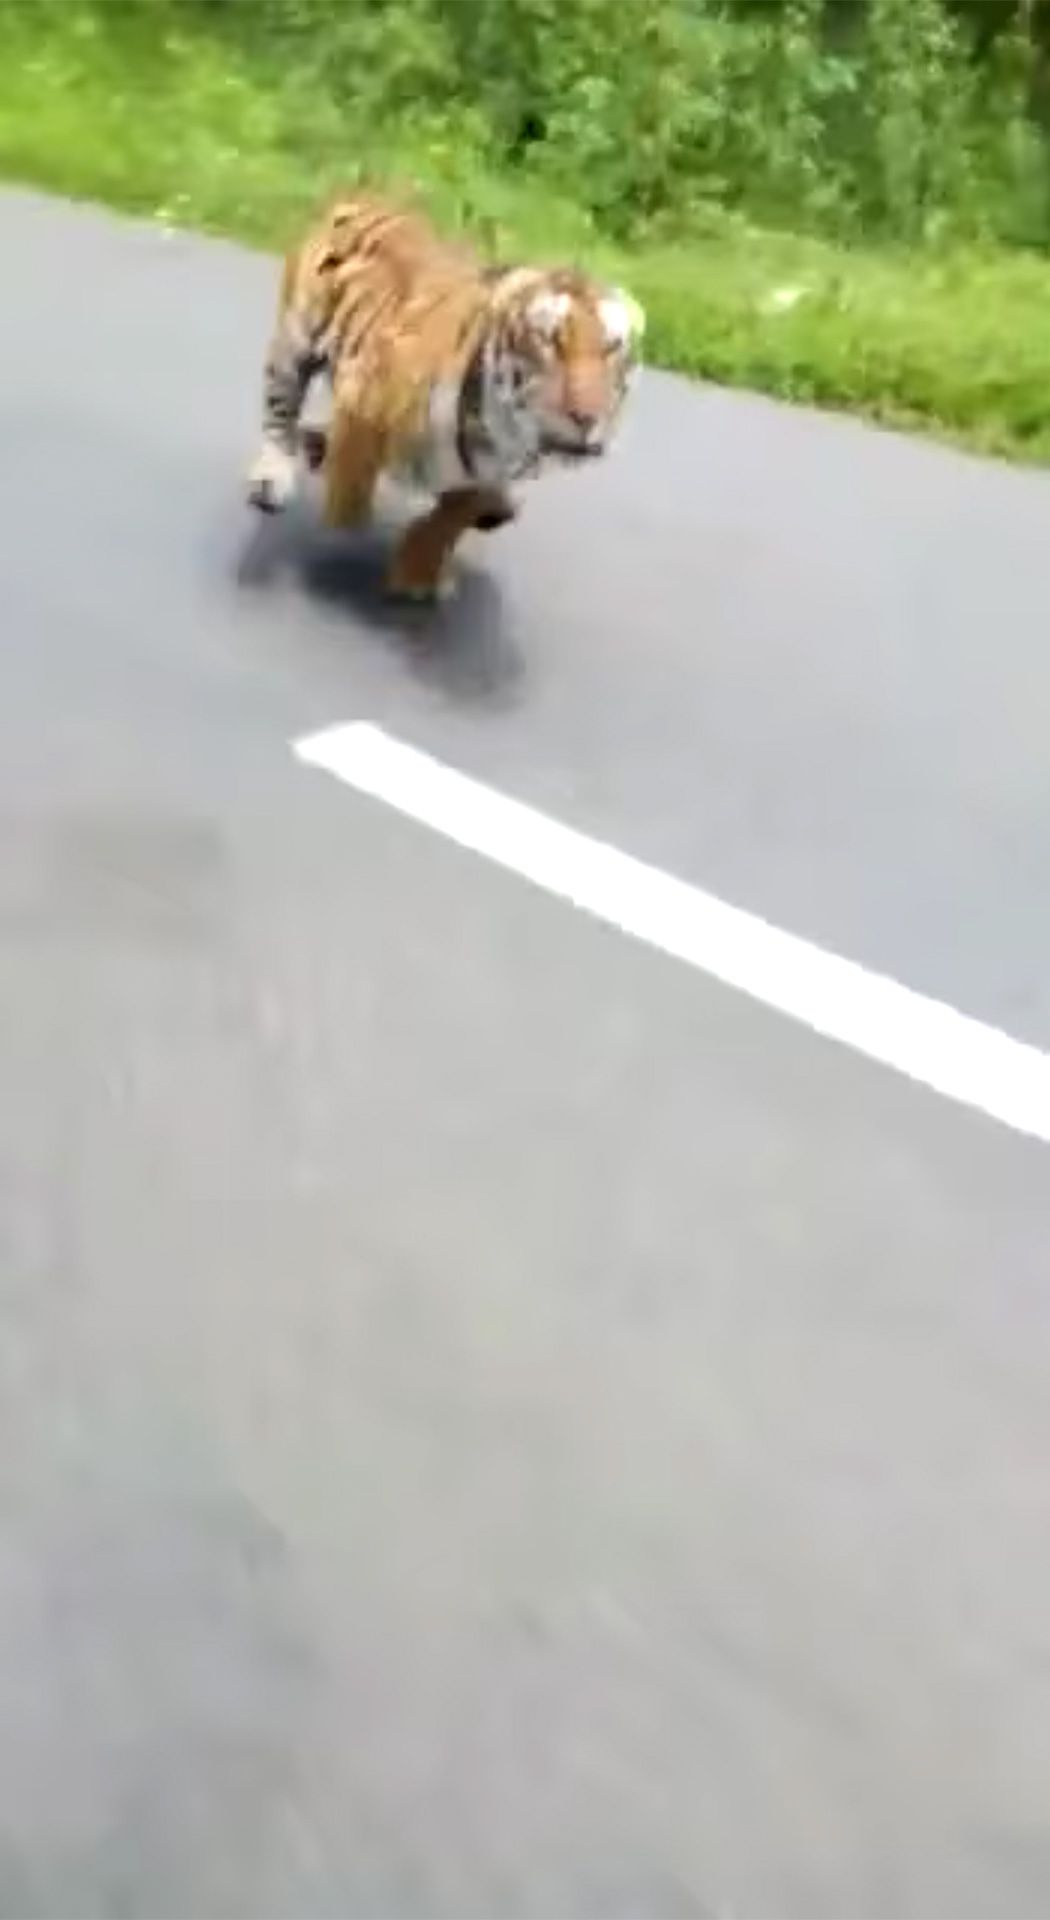 Tiger chases after motorcycle